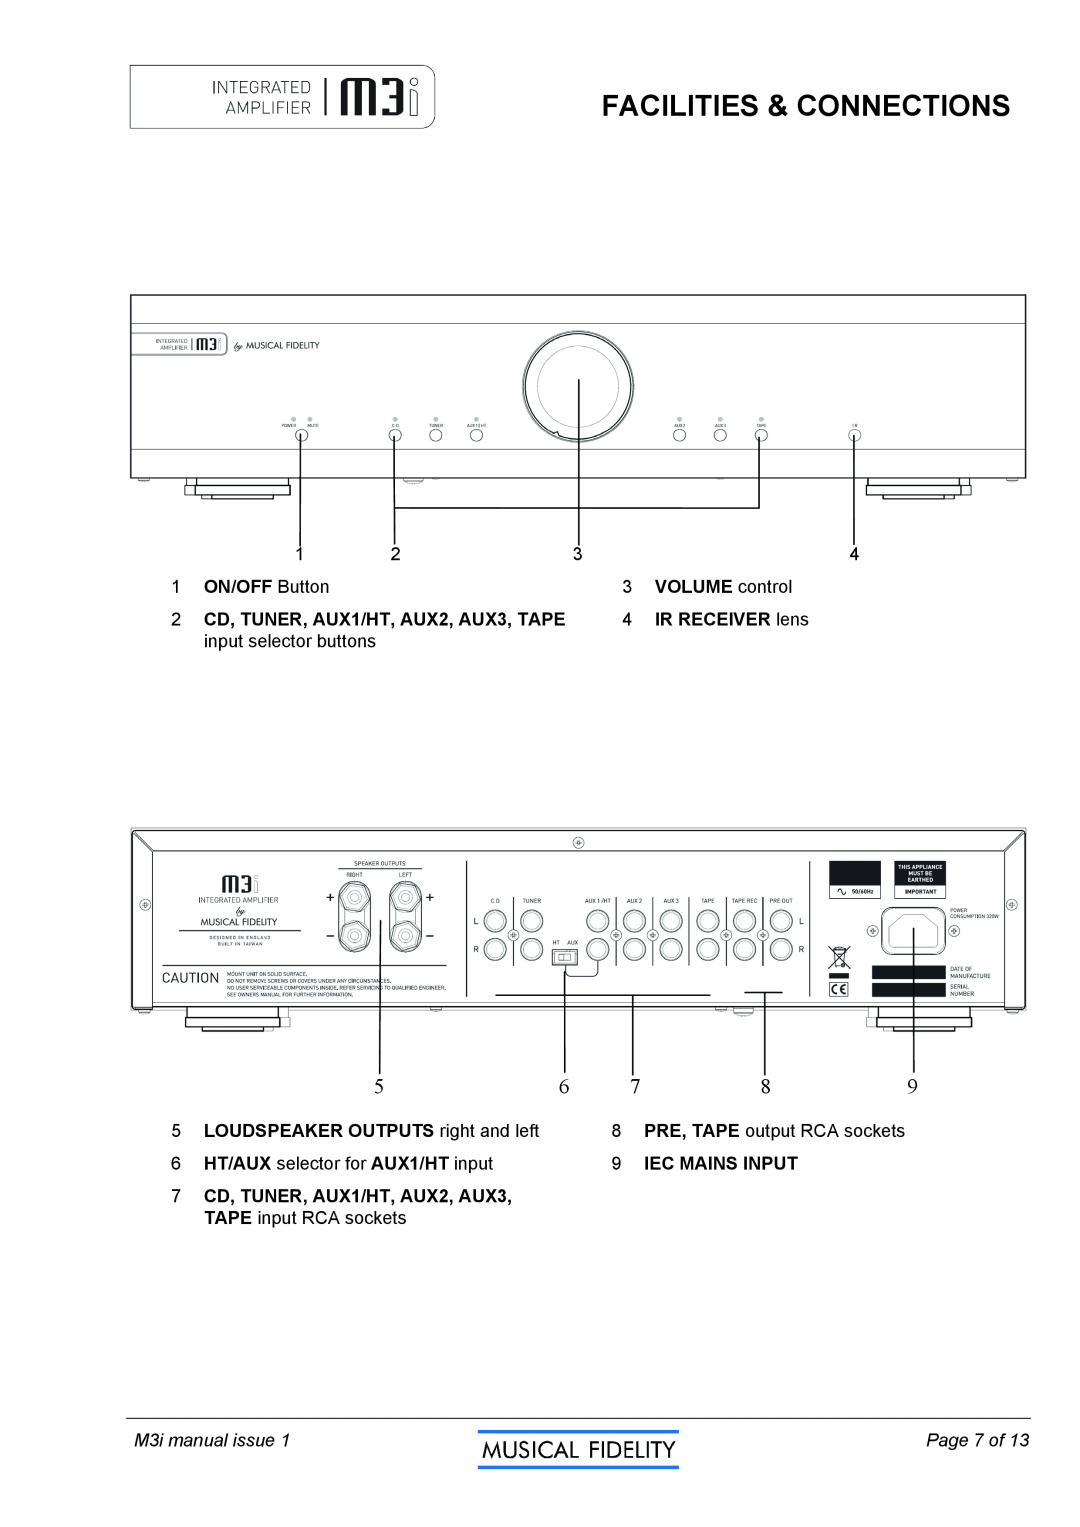 Musical Fidelity M3I manual Facilities & Connections, ON/OFF Button, VOLUME control, CD, TUNER, AUX1/HT, AUX2, AUX3, TAPE 